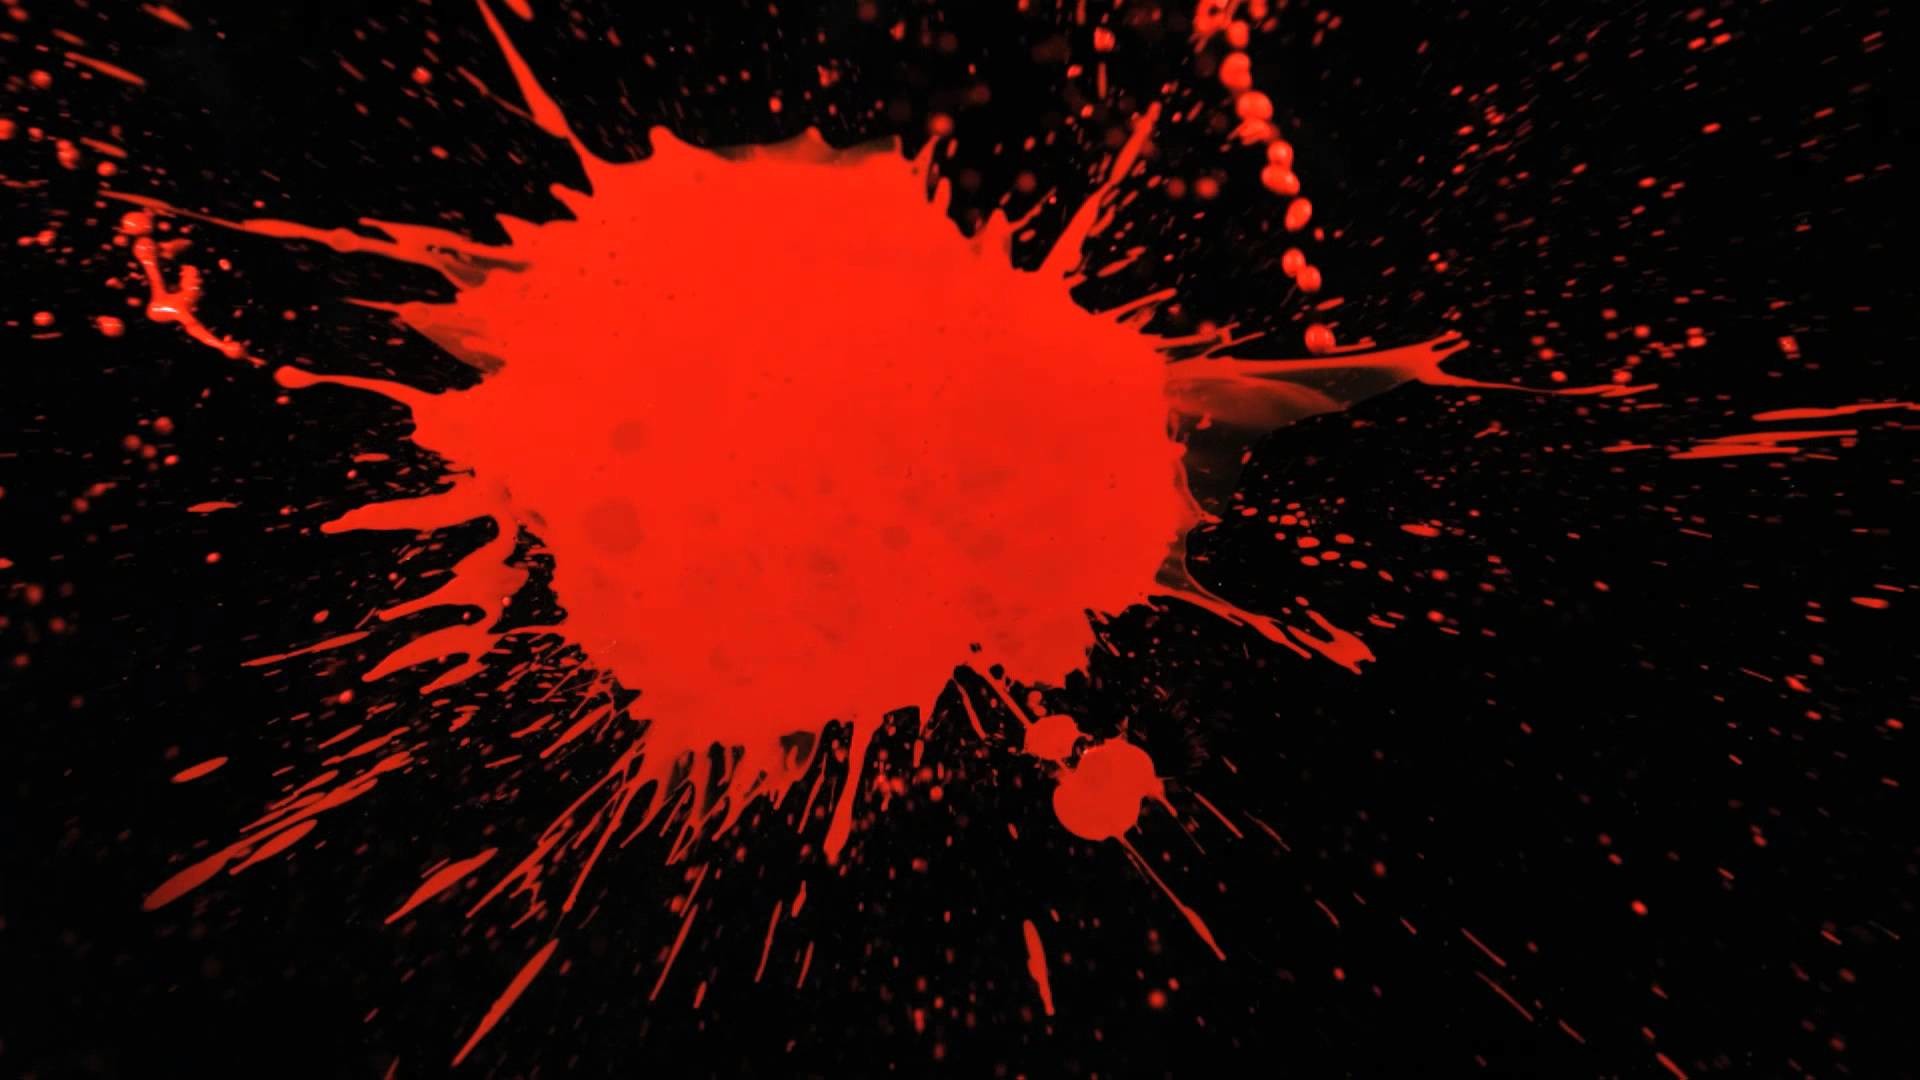 1920x1080 Slow Motion Paint Splatter with Red Paint Splattering a Black Background in  HD Slow Mo Video View - YouTube